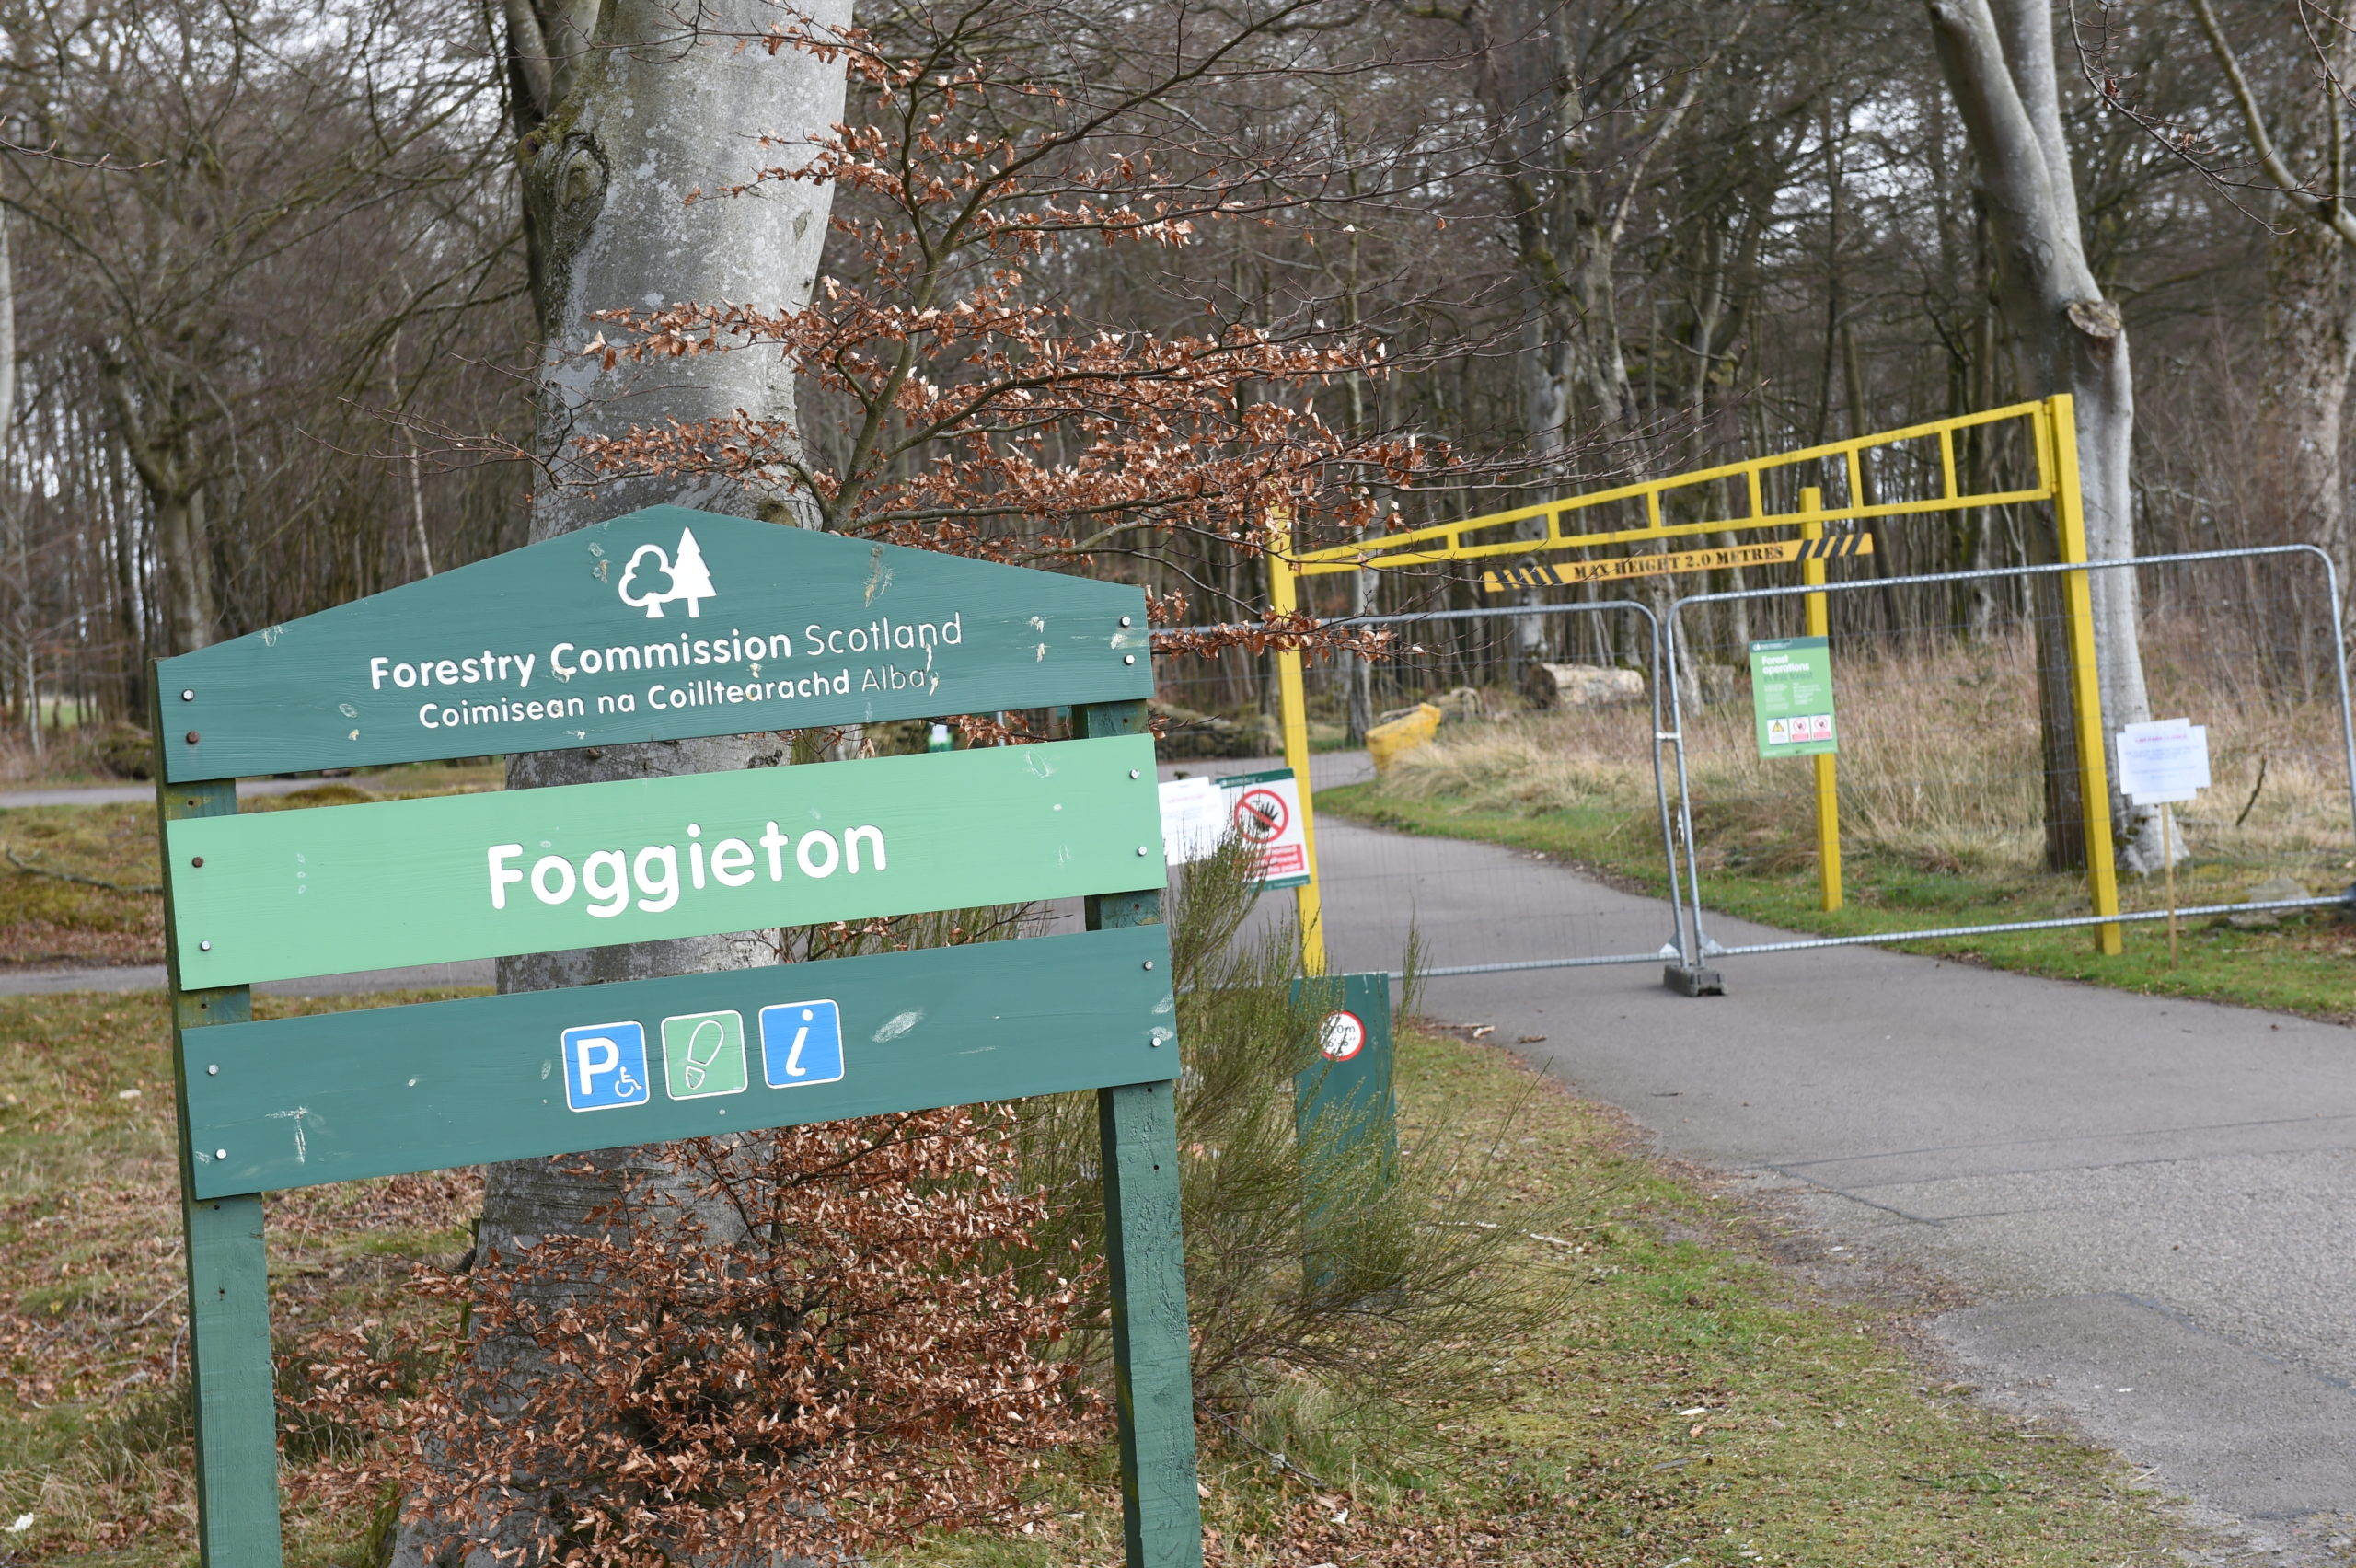 Foggieton Forestry Commission Scotland Baillieswells car park  fenced off due to Covid-19 outbreak.  

Picture by Paul Glendell